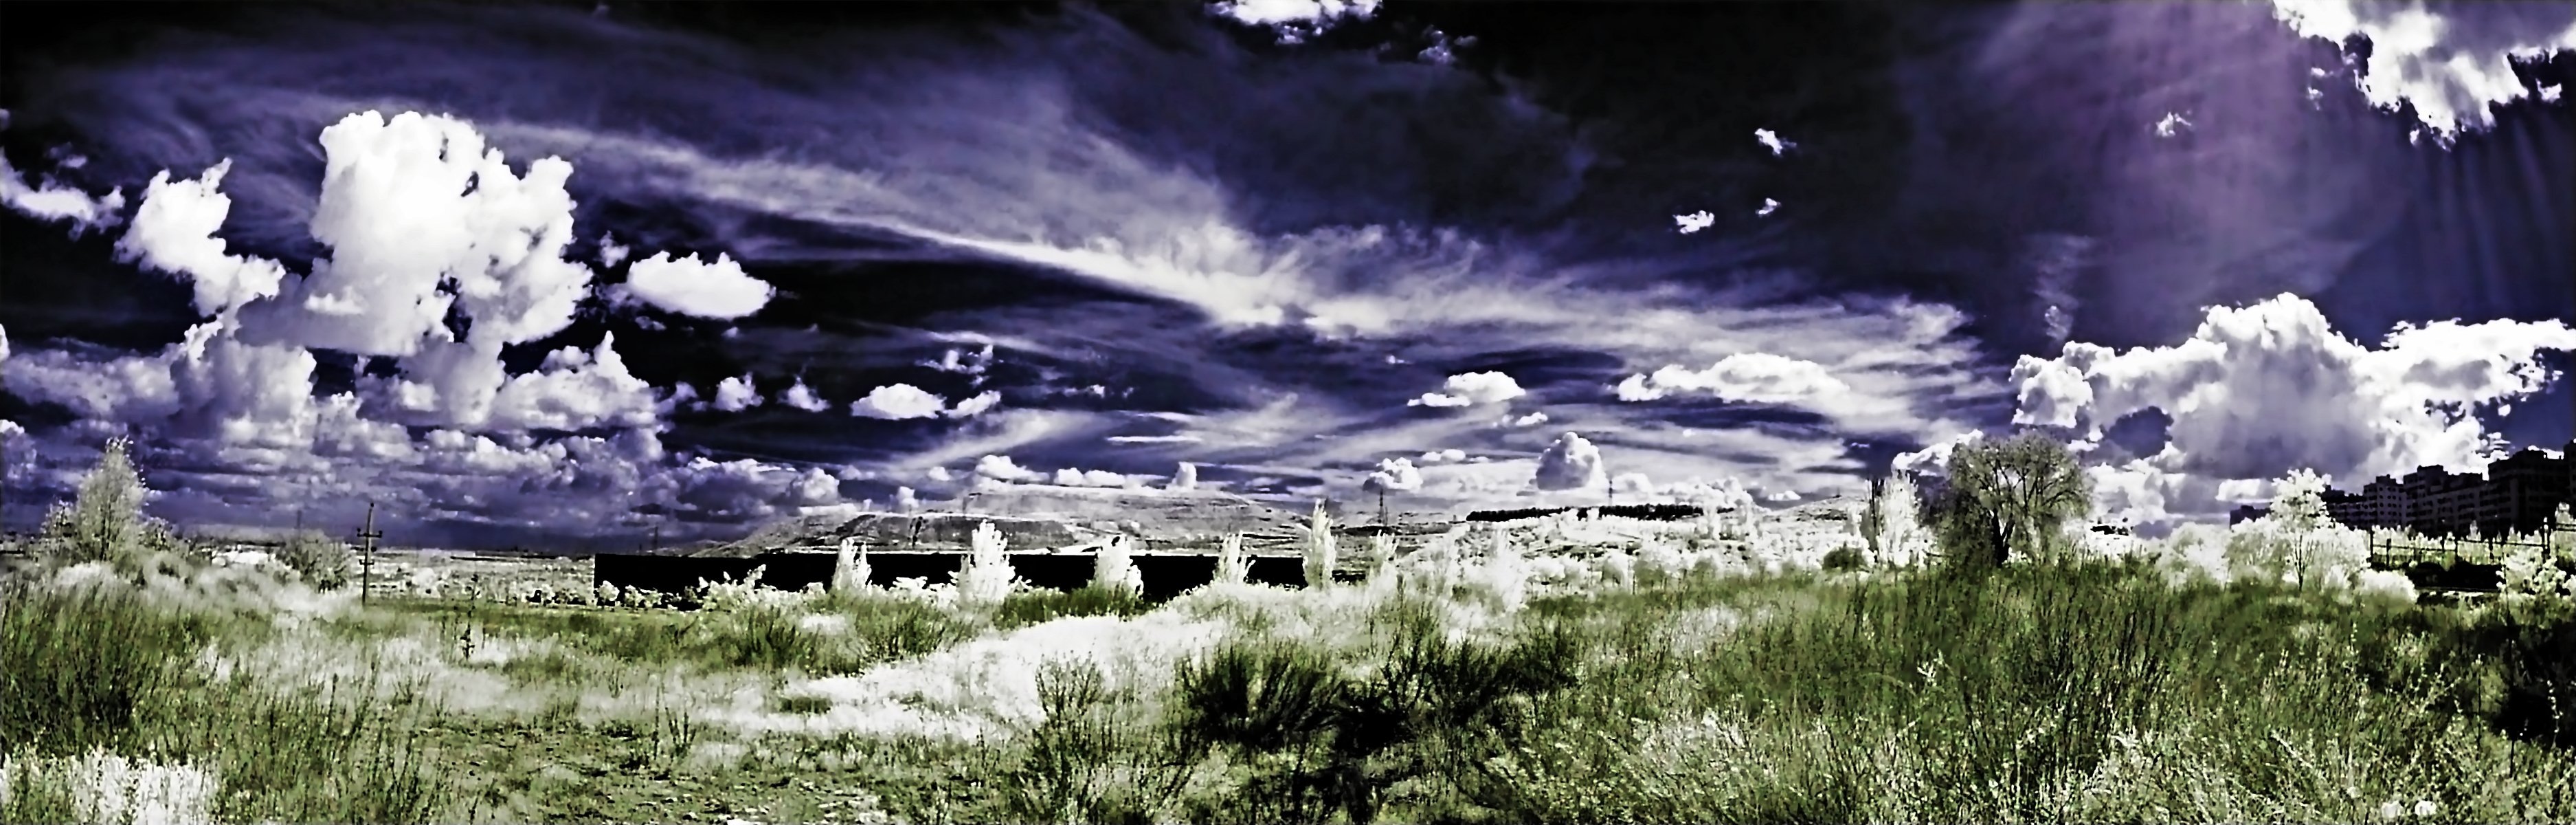 Infrared Photography fields and clouds